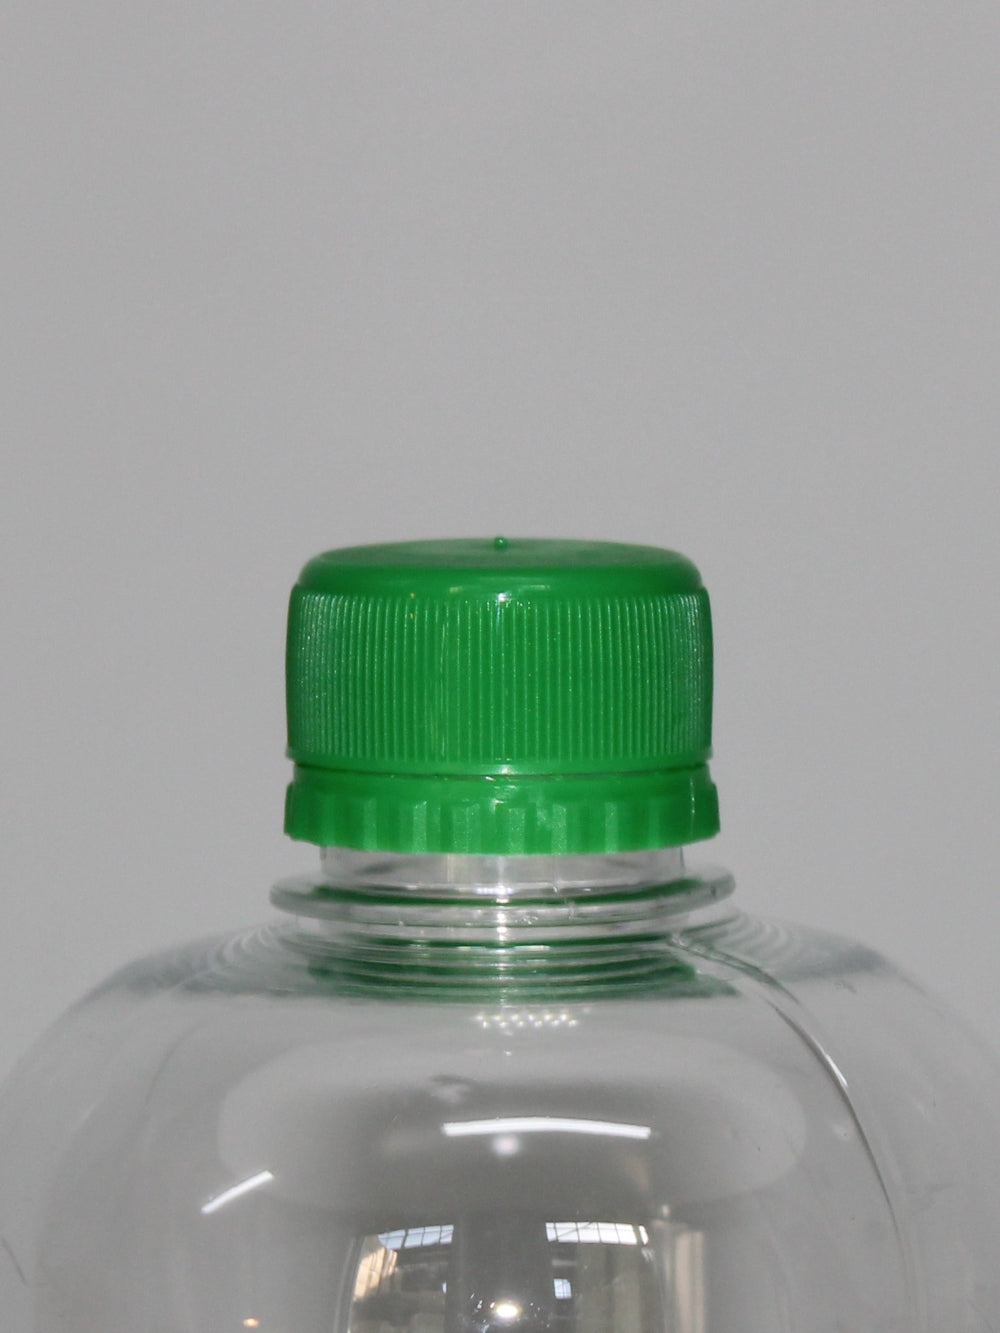 12 oz. Clear PET Tall Water Bottle with 28mm PCO Neck (Cap Sold